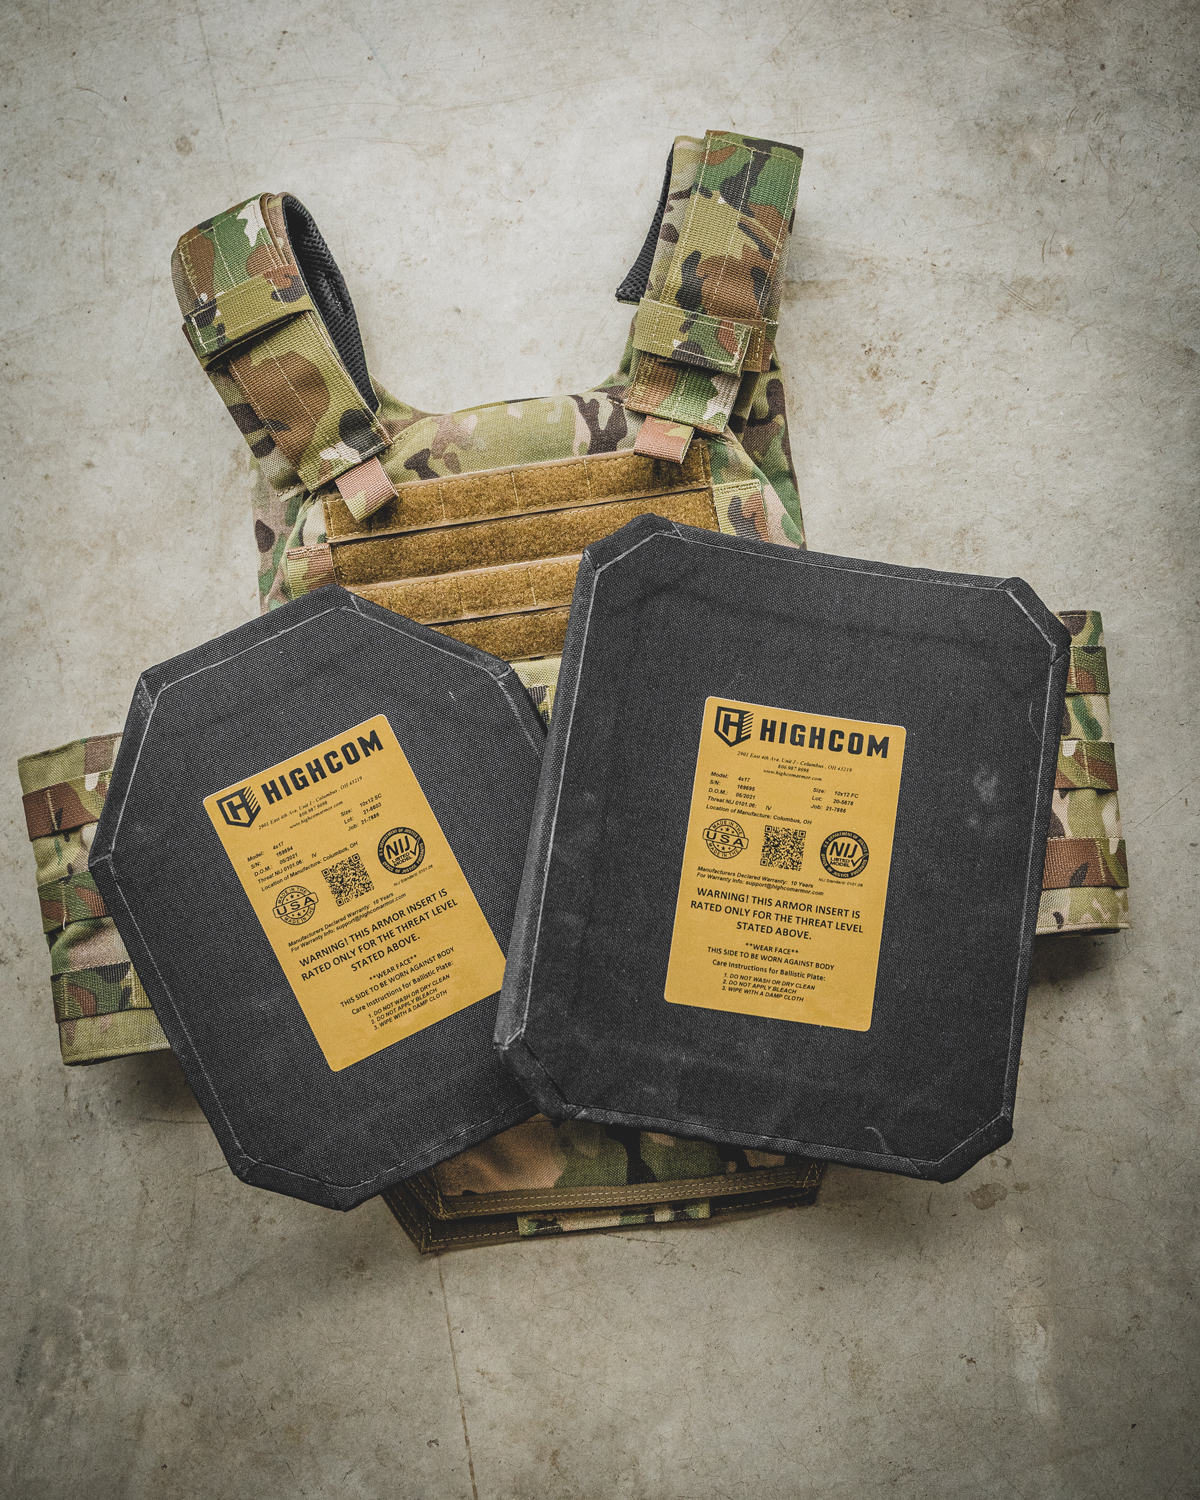 HighCom Armor ACAP Carrier in multicam color with two Guardian hard armor plates 4s17 shooters and full cut